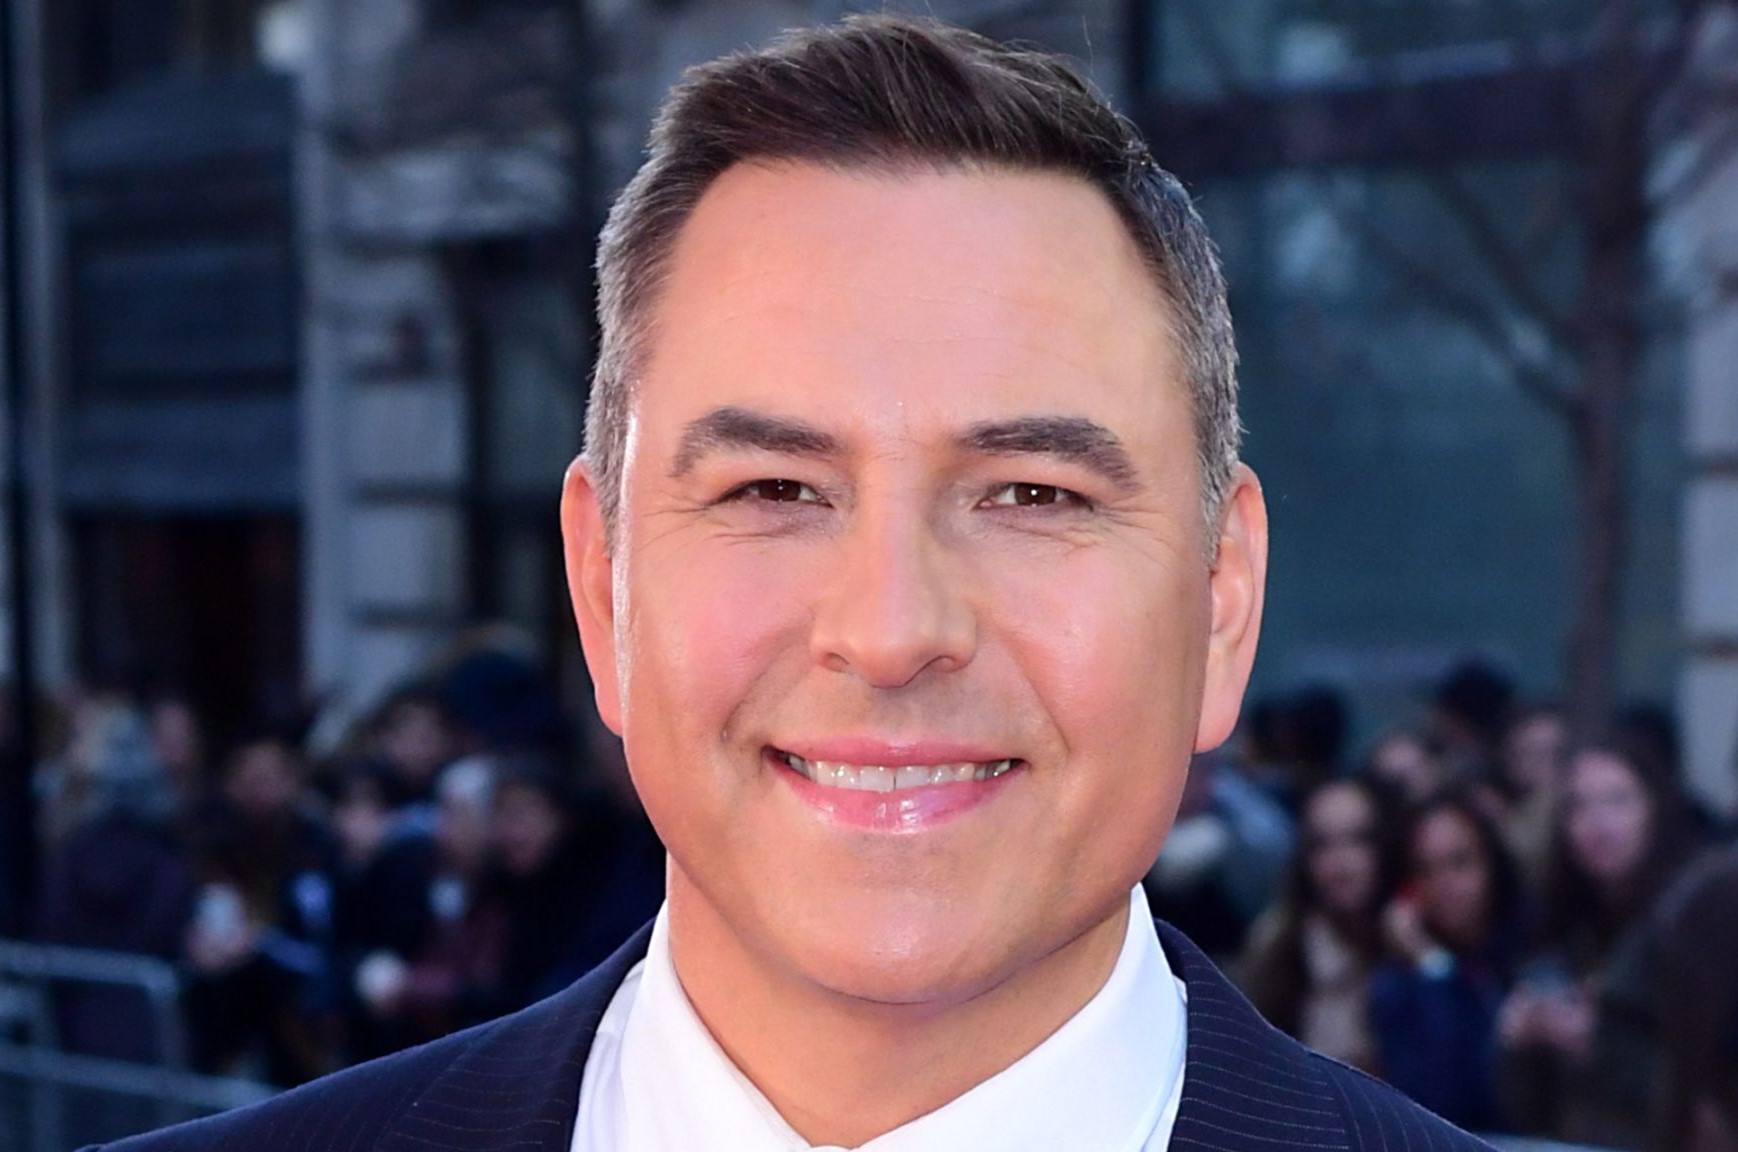 17 Intriguing Facts About David Walliams - Facts.net